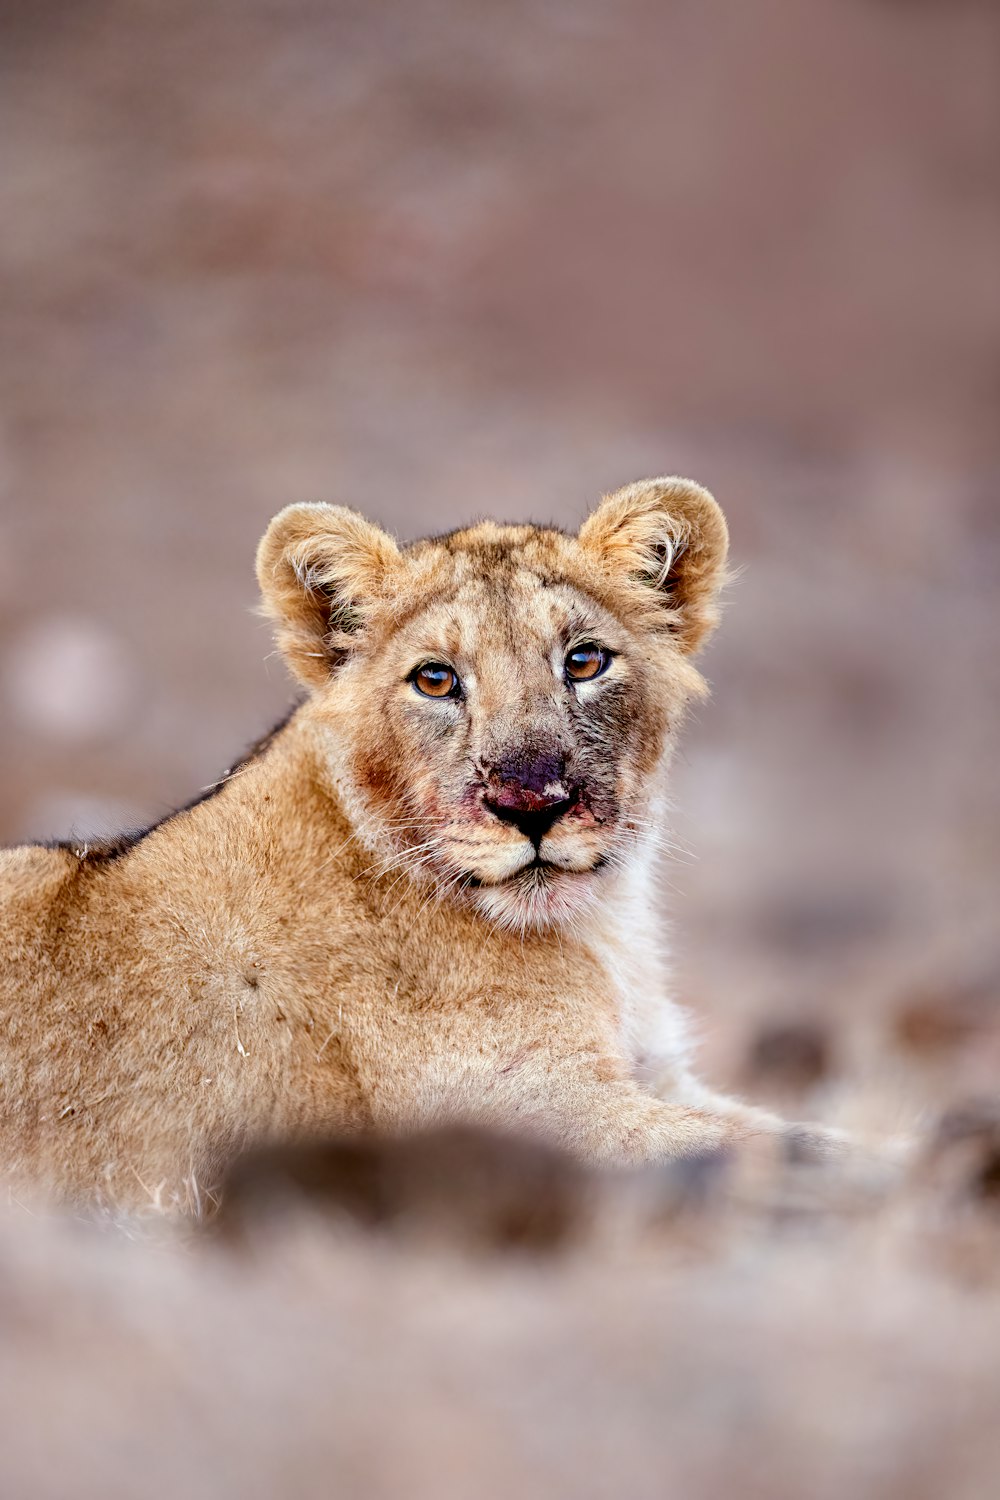 a young lion cub sitting in a rocky area